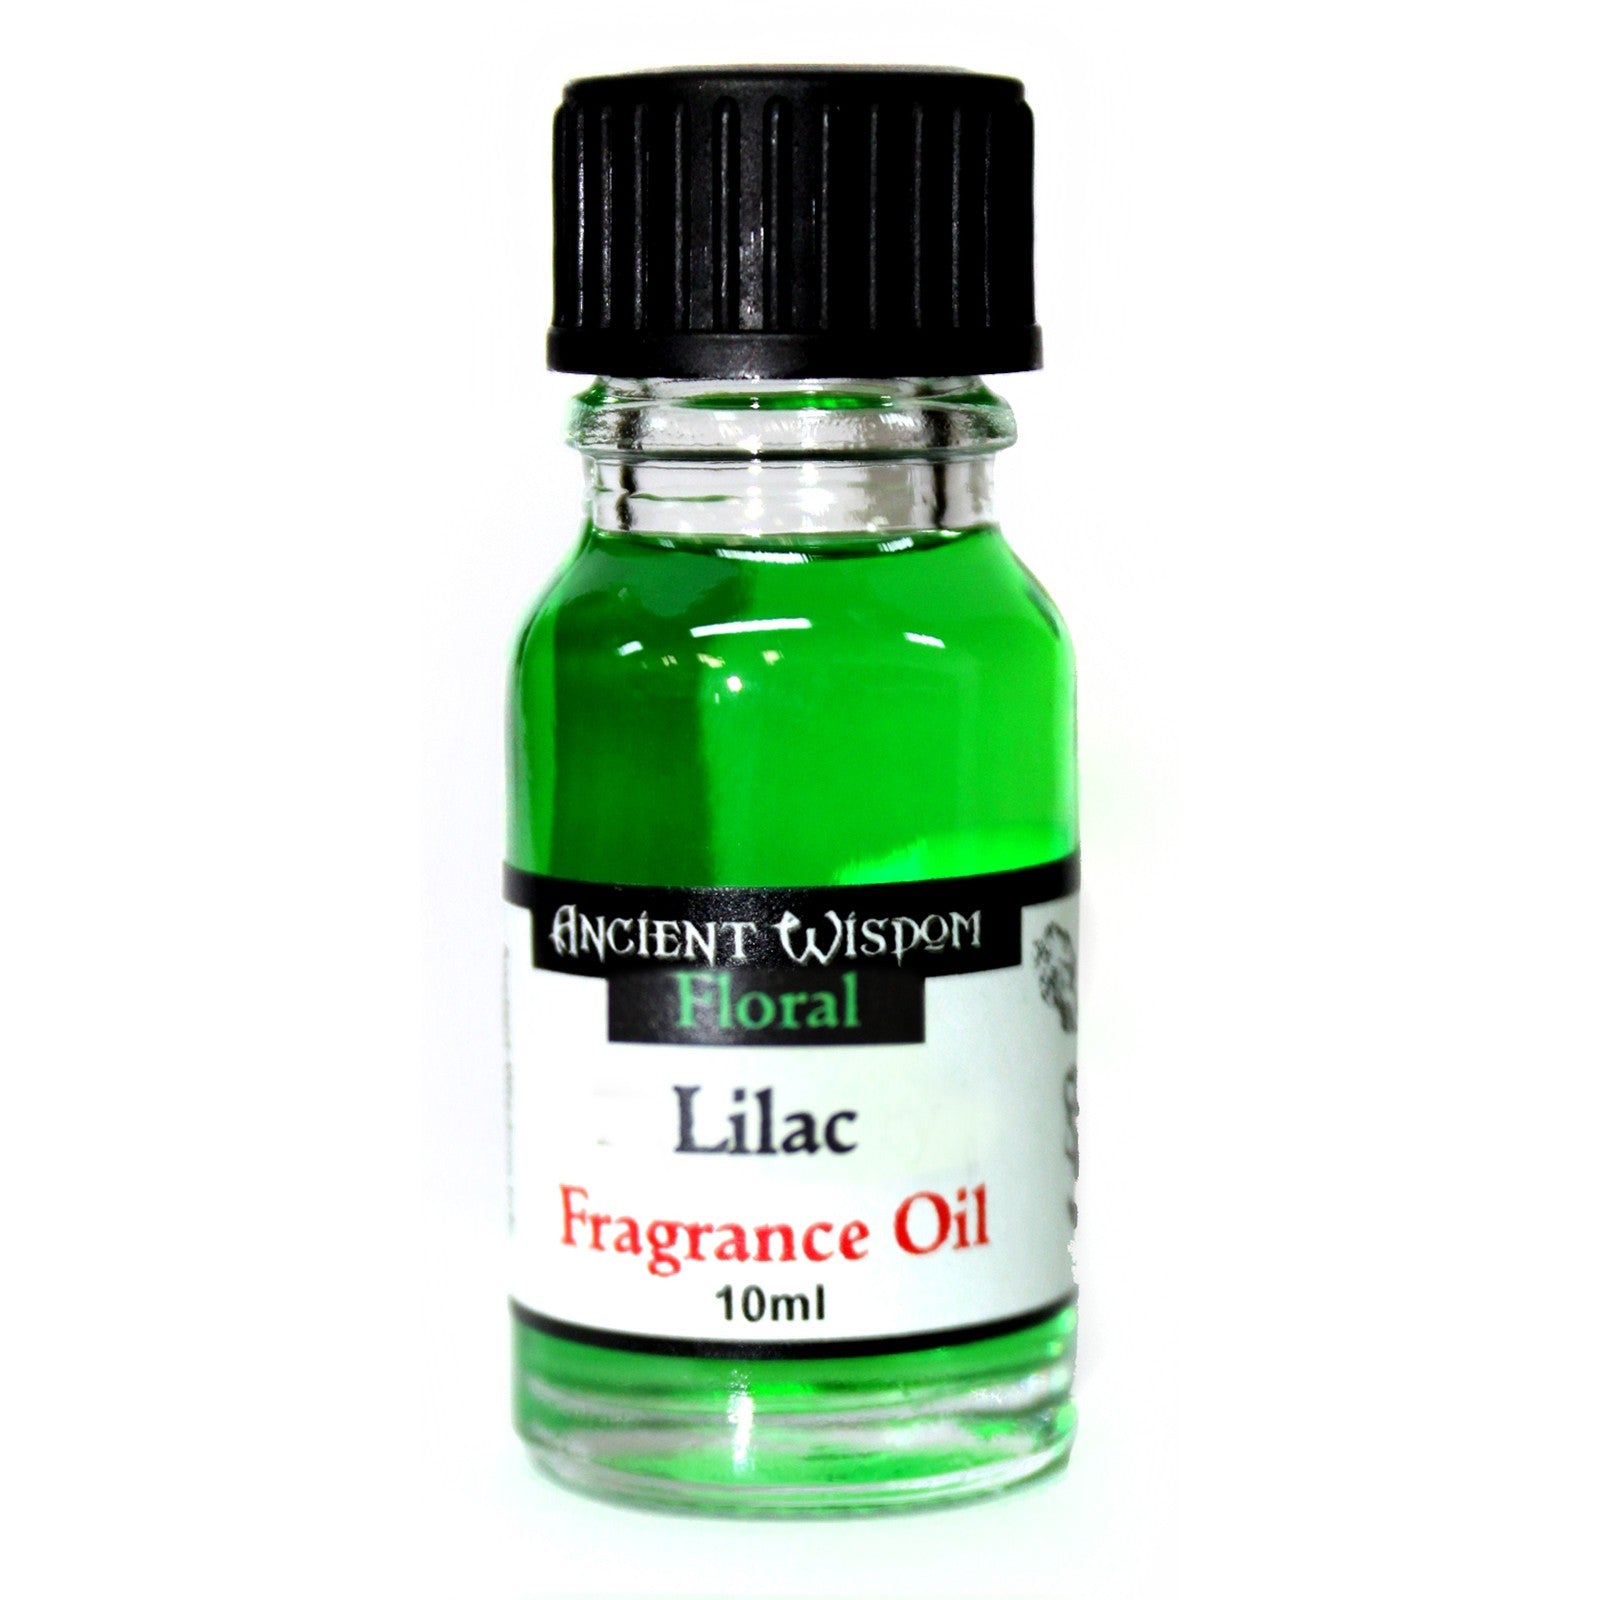 View 10ml Lilac Fragrance Oil information